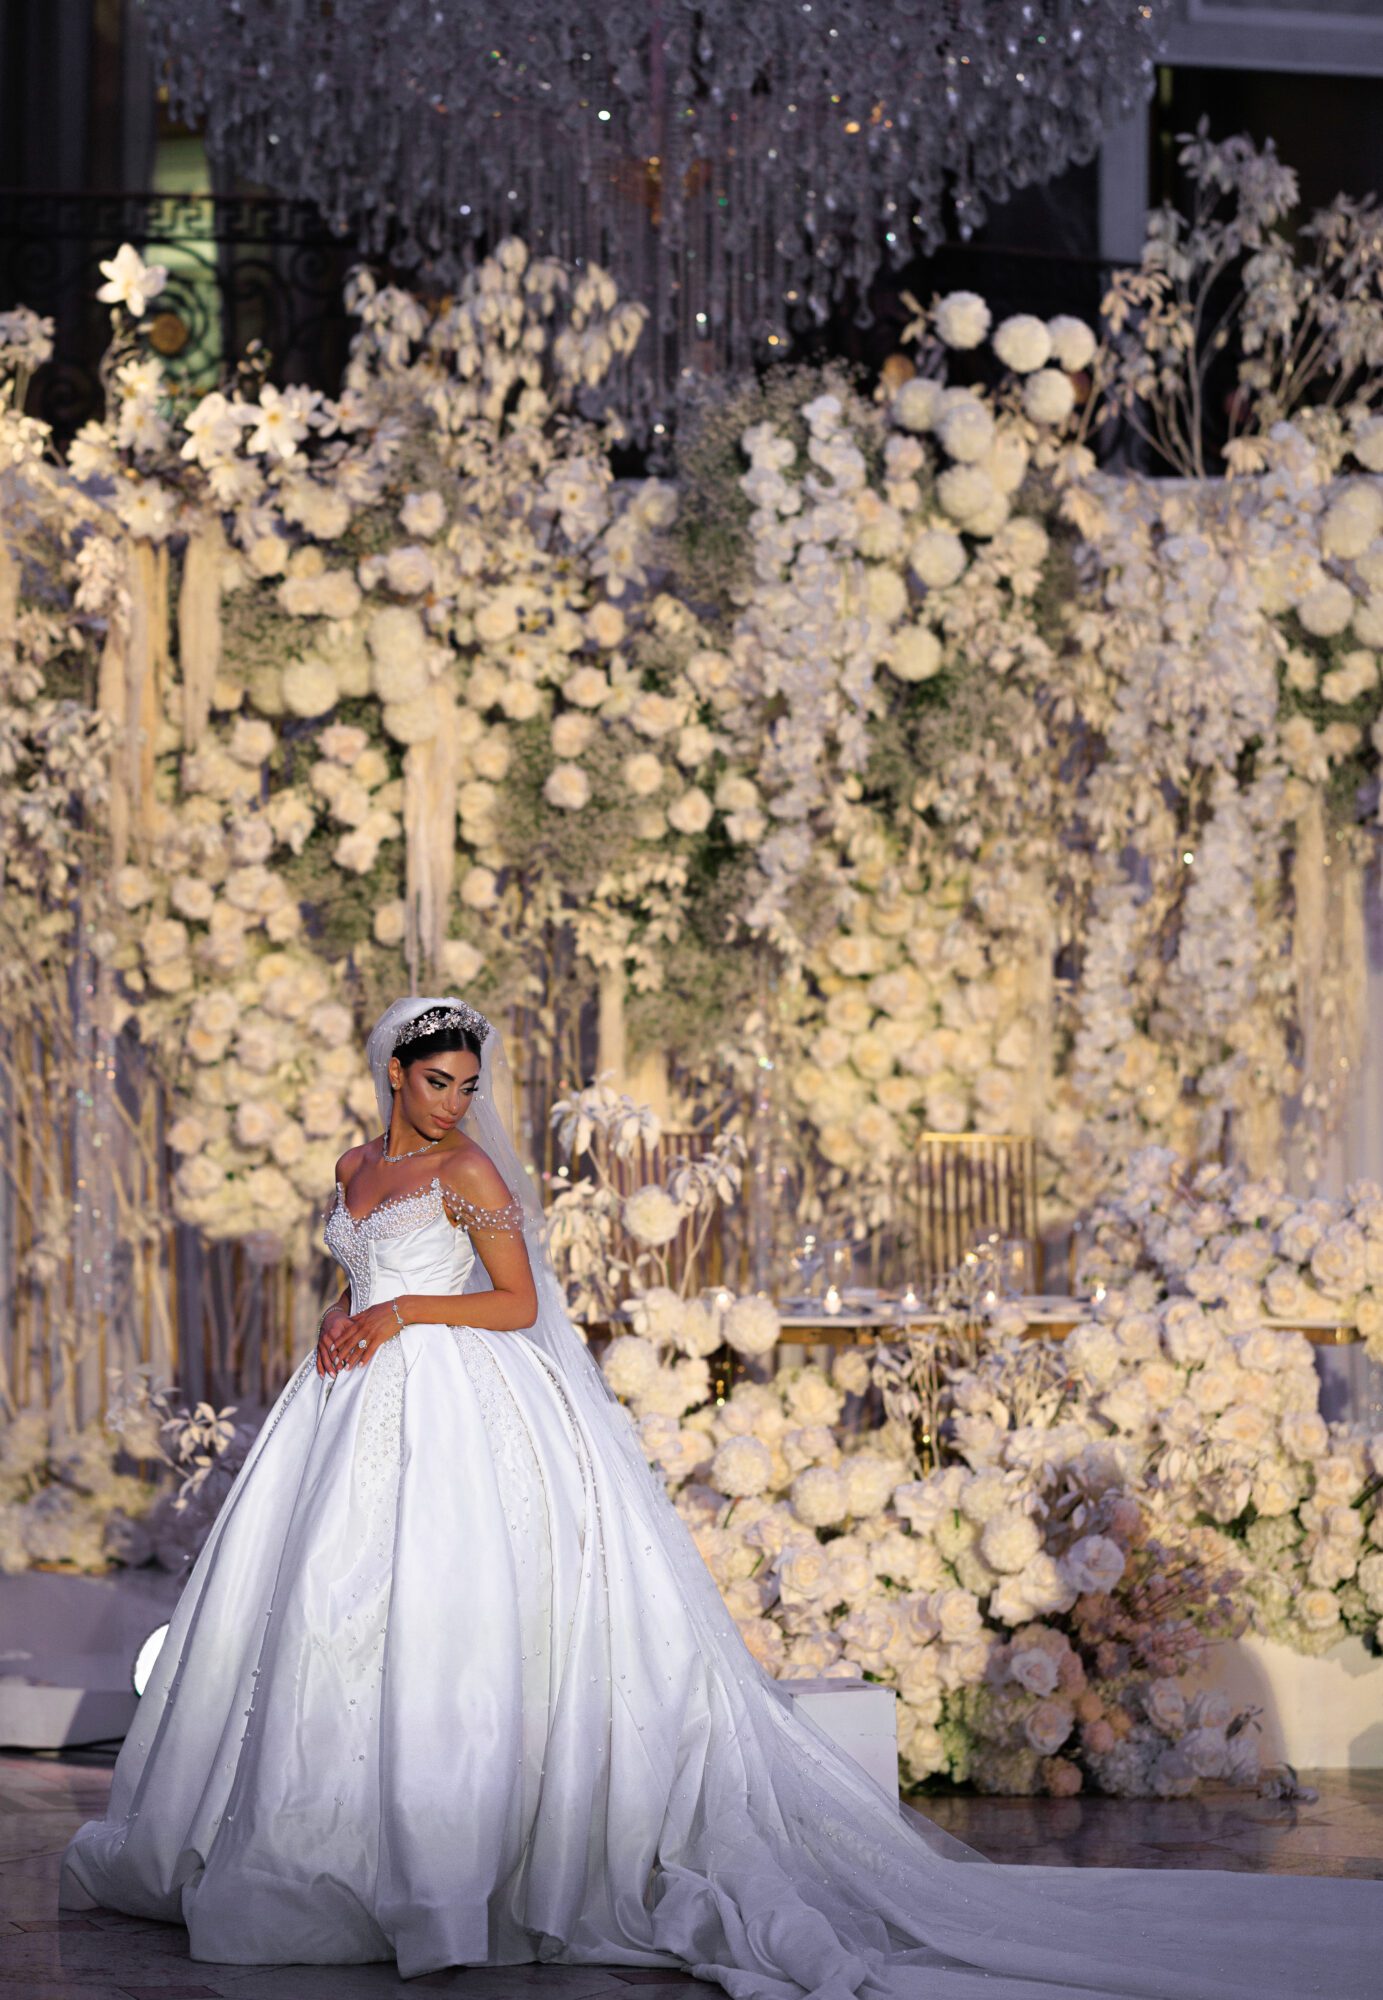 A bride stands amid a luxurious floral backdrop created by a luxury wedding florist, wearing an elegant white gown with a sweeping skirt and pearl accessories, her hair styled in an intricate updo.